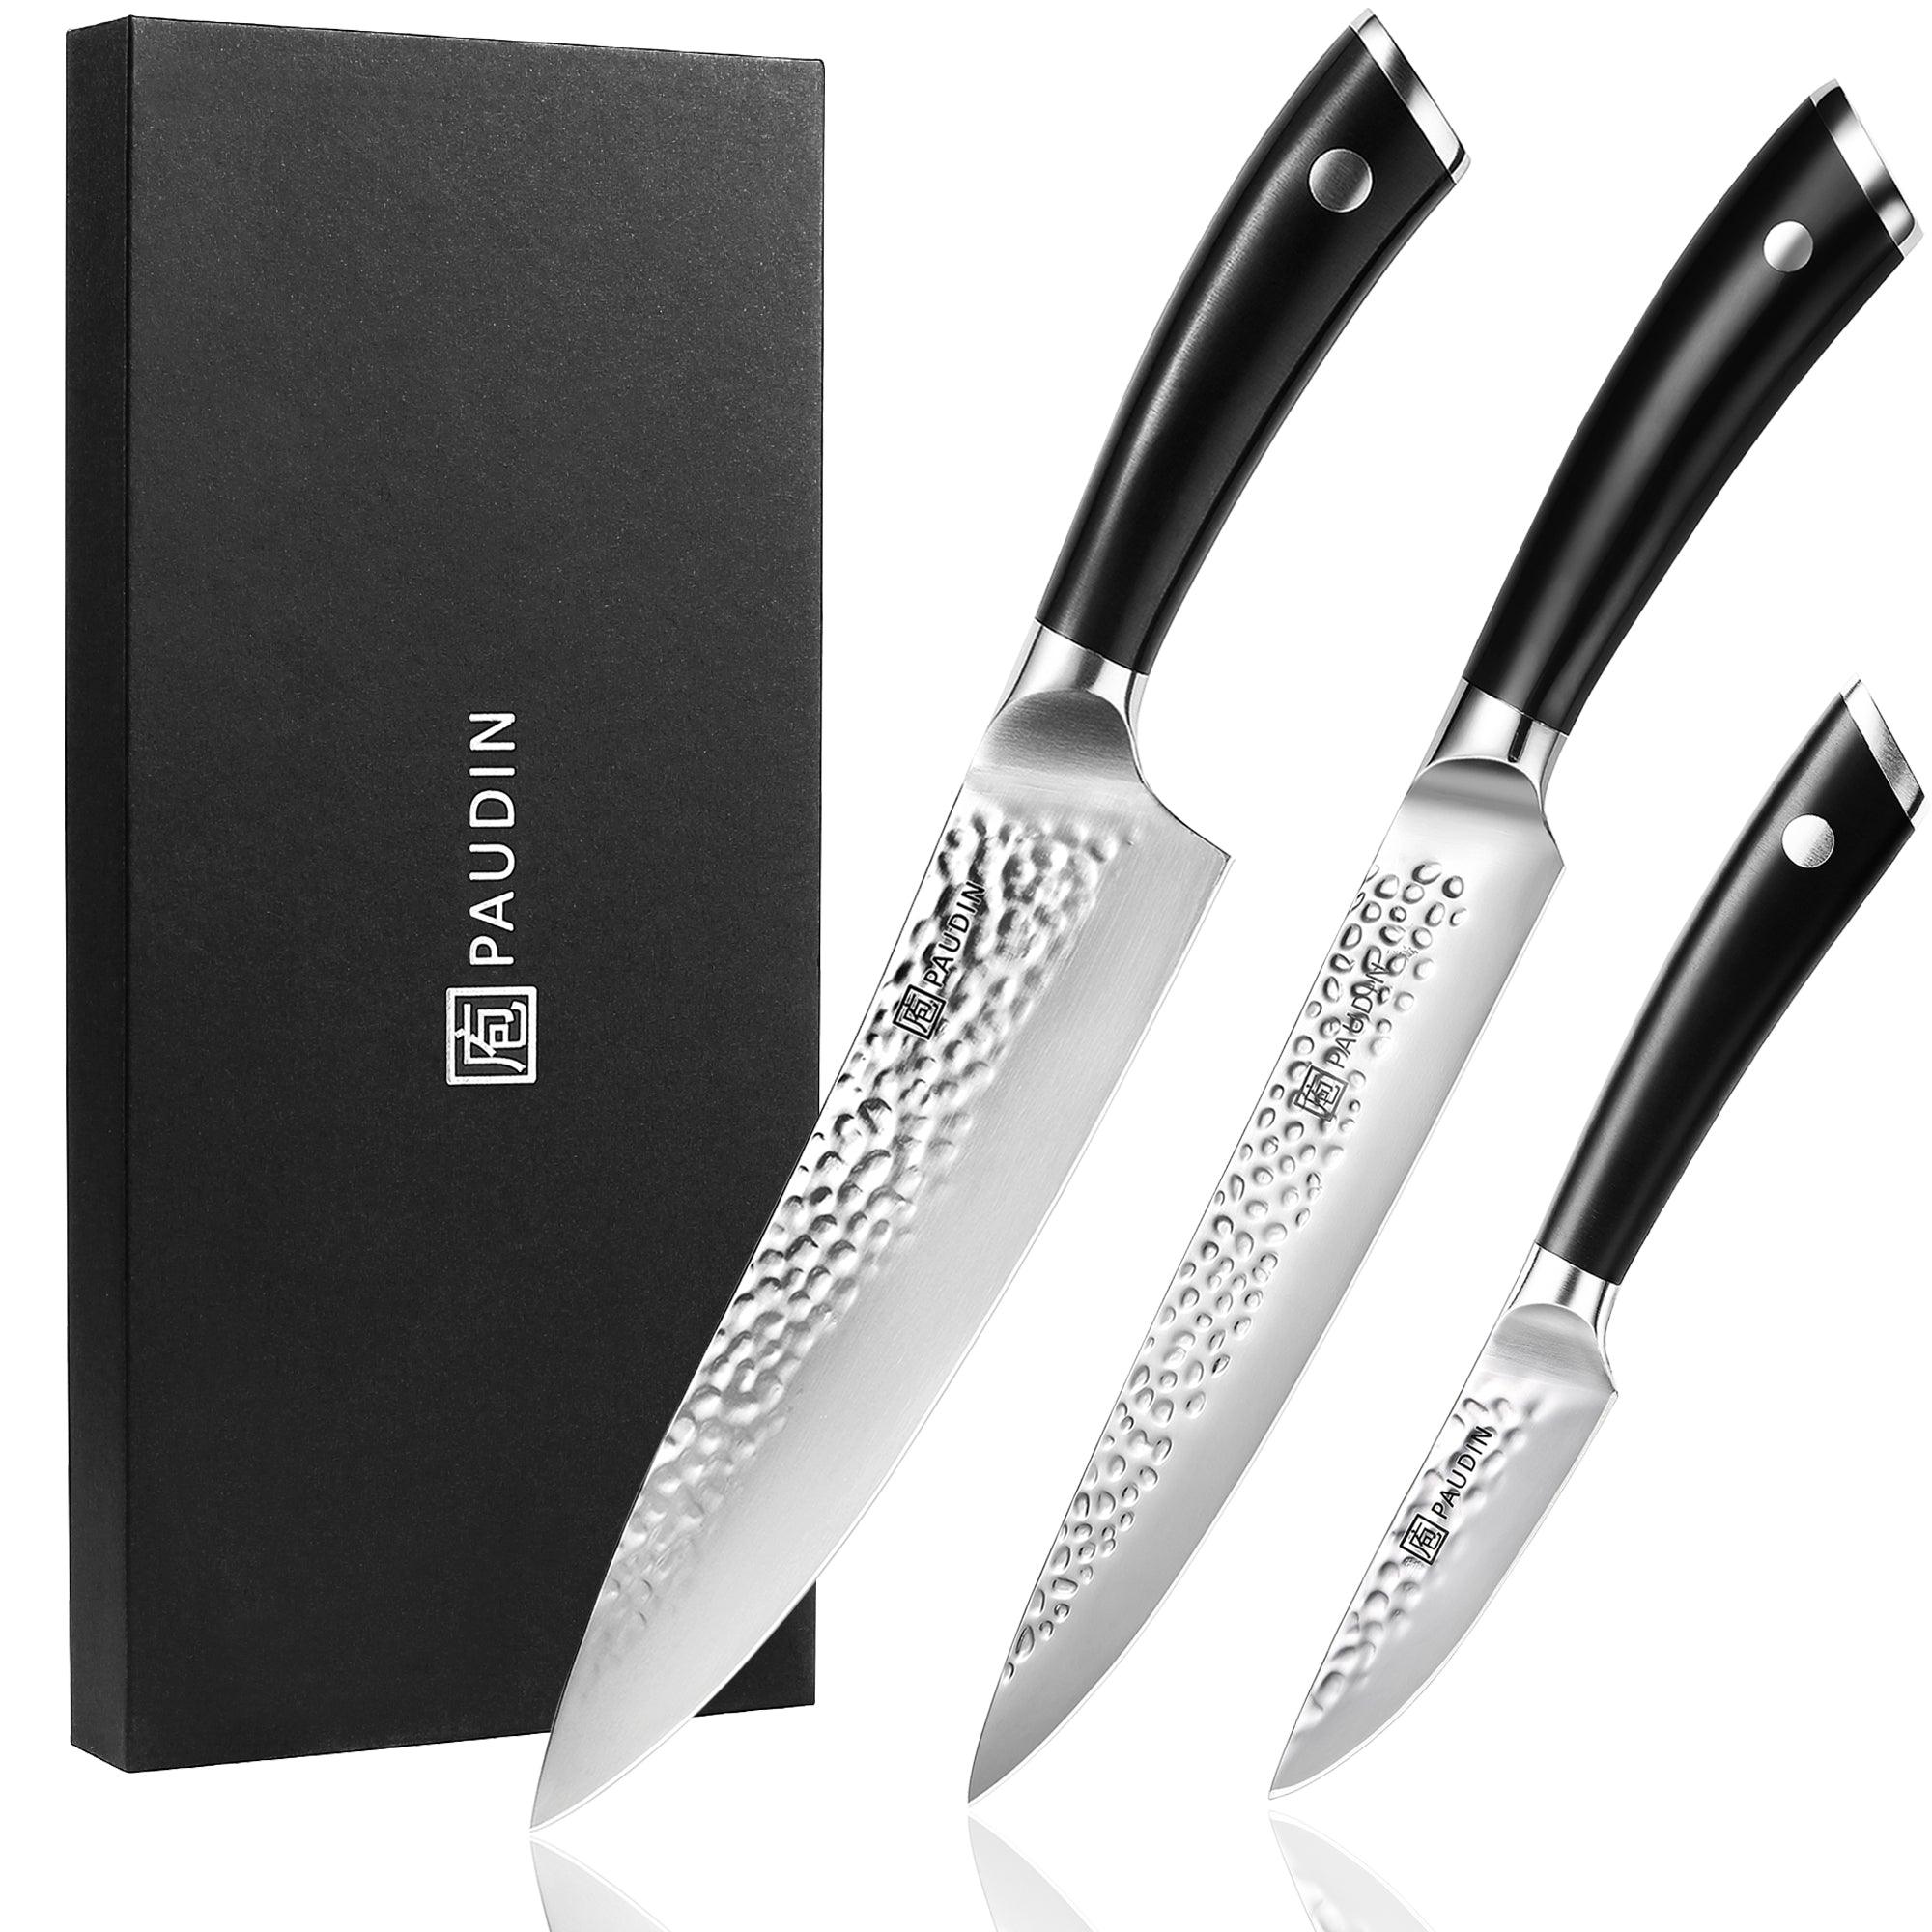 PAUDIN 7 Pieces Chef Knife Set, Professional Knives Set for Kitchen, Sharp  High Carbon Stainless Steel Blade and Pakkawood Handle with Gift Box